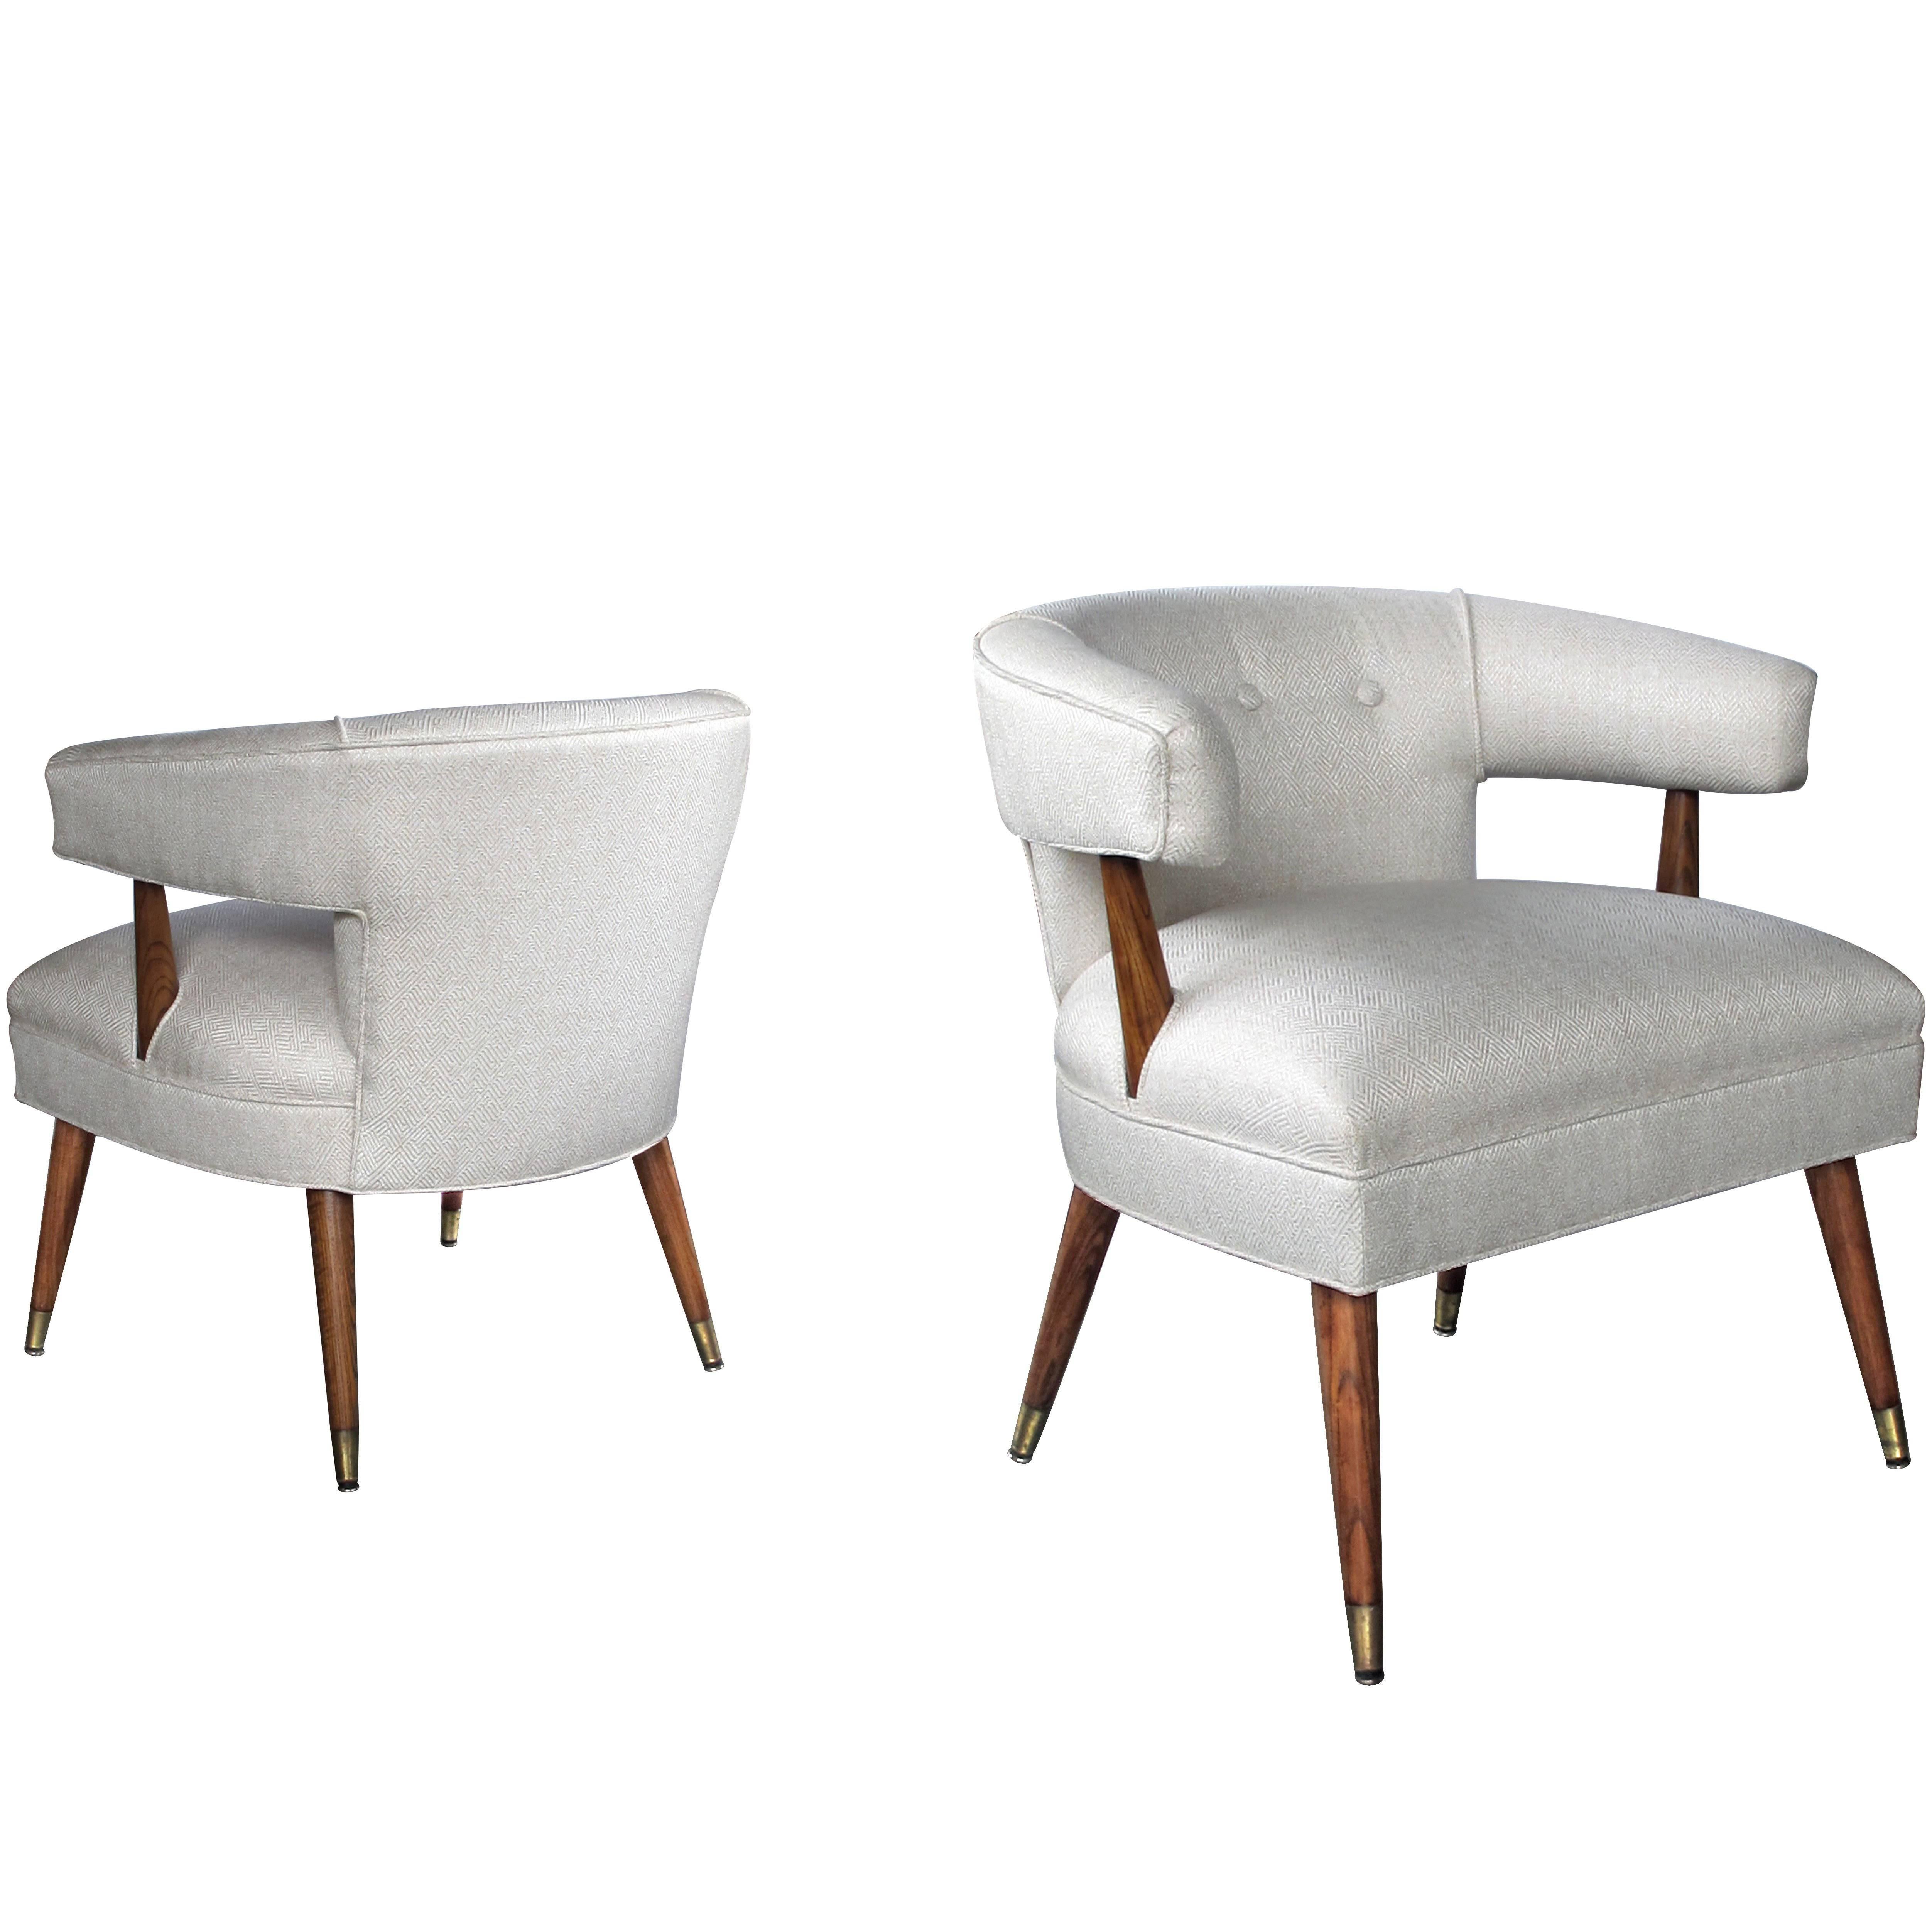 Stylish Pair of American Mid Century Barrel-Back Upholstered Armchairs